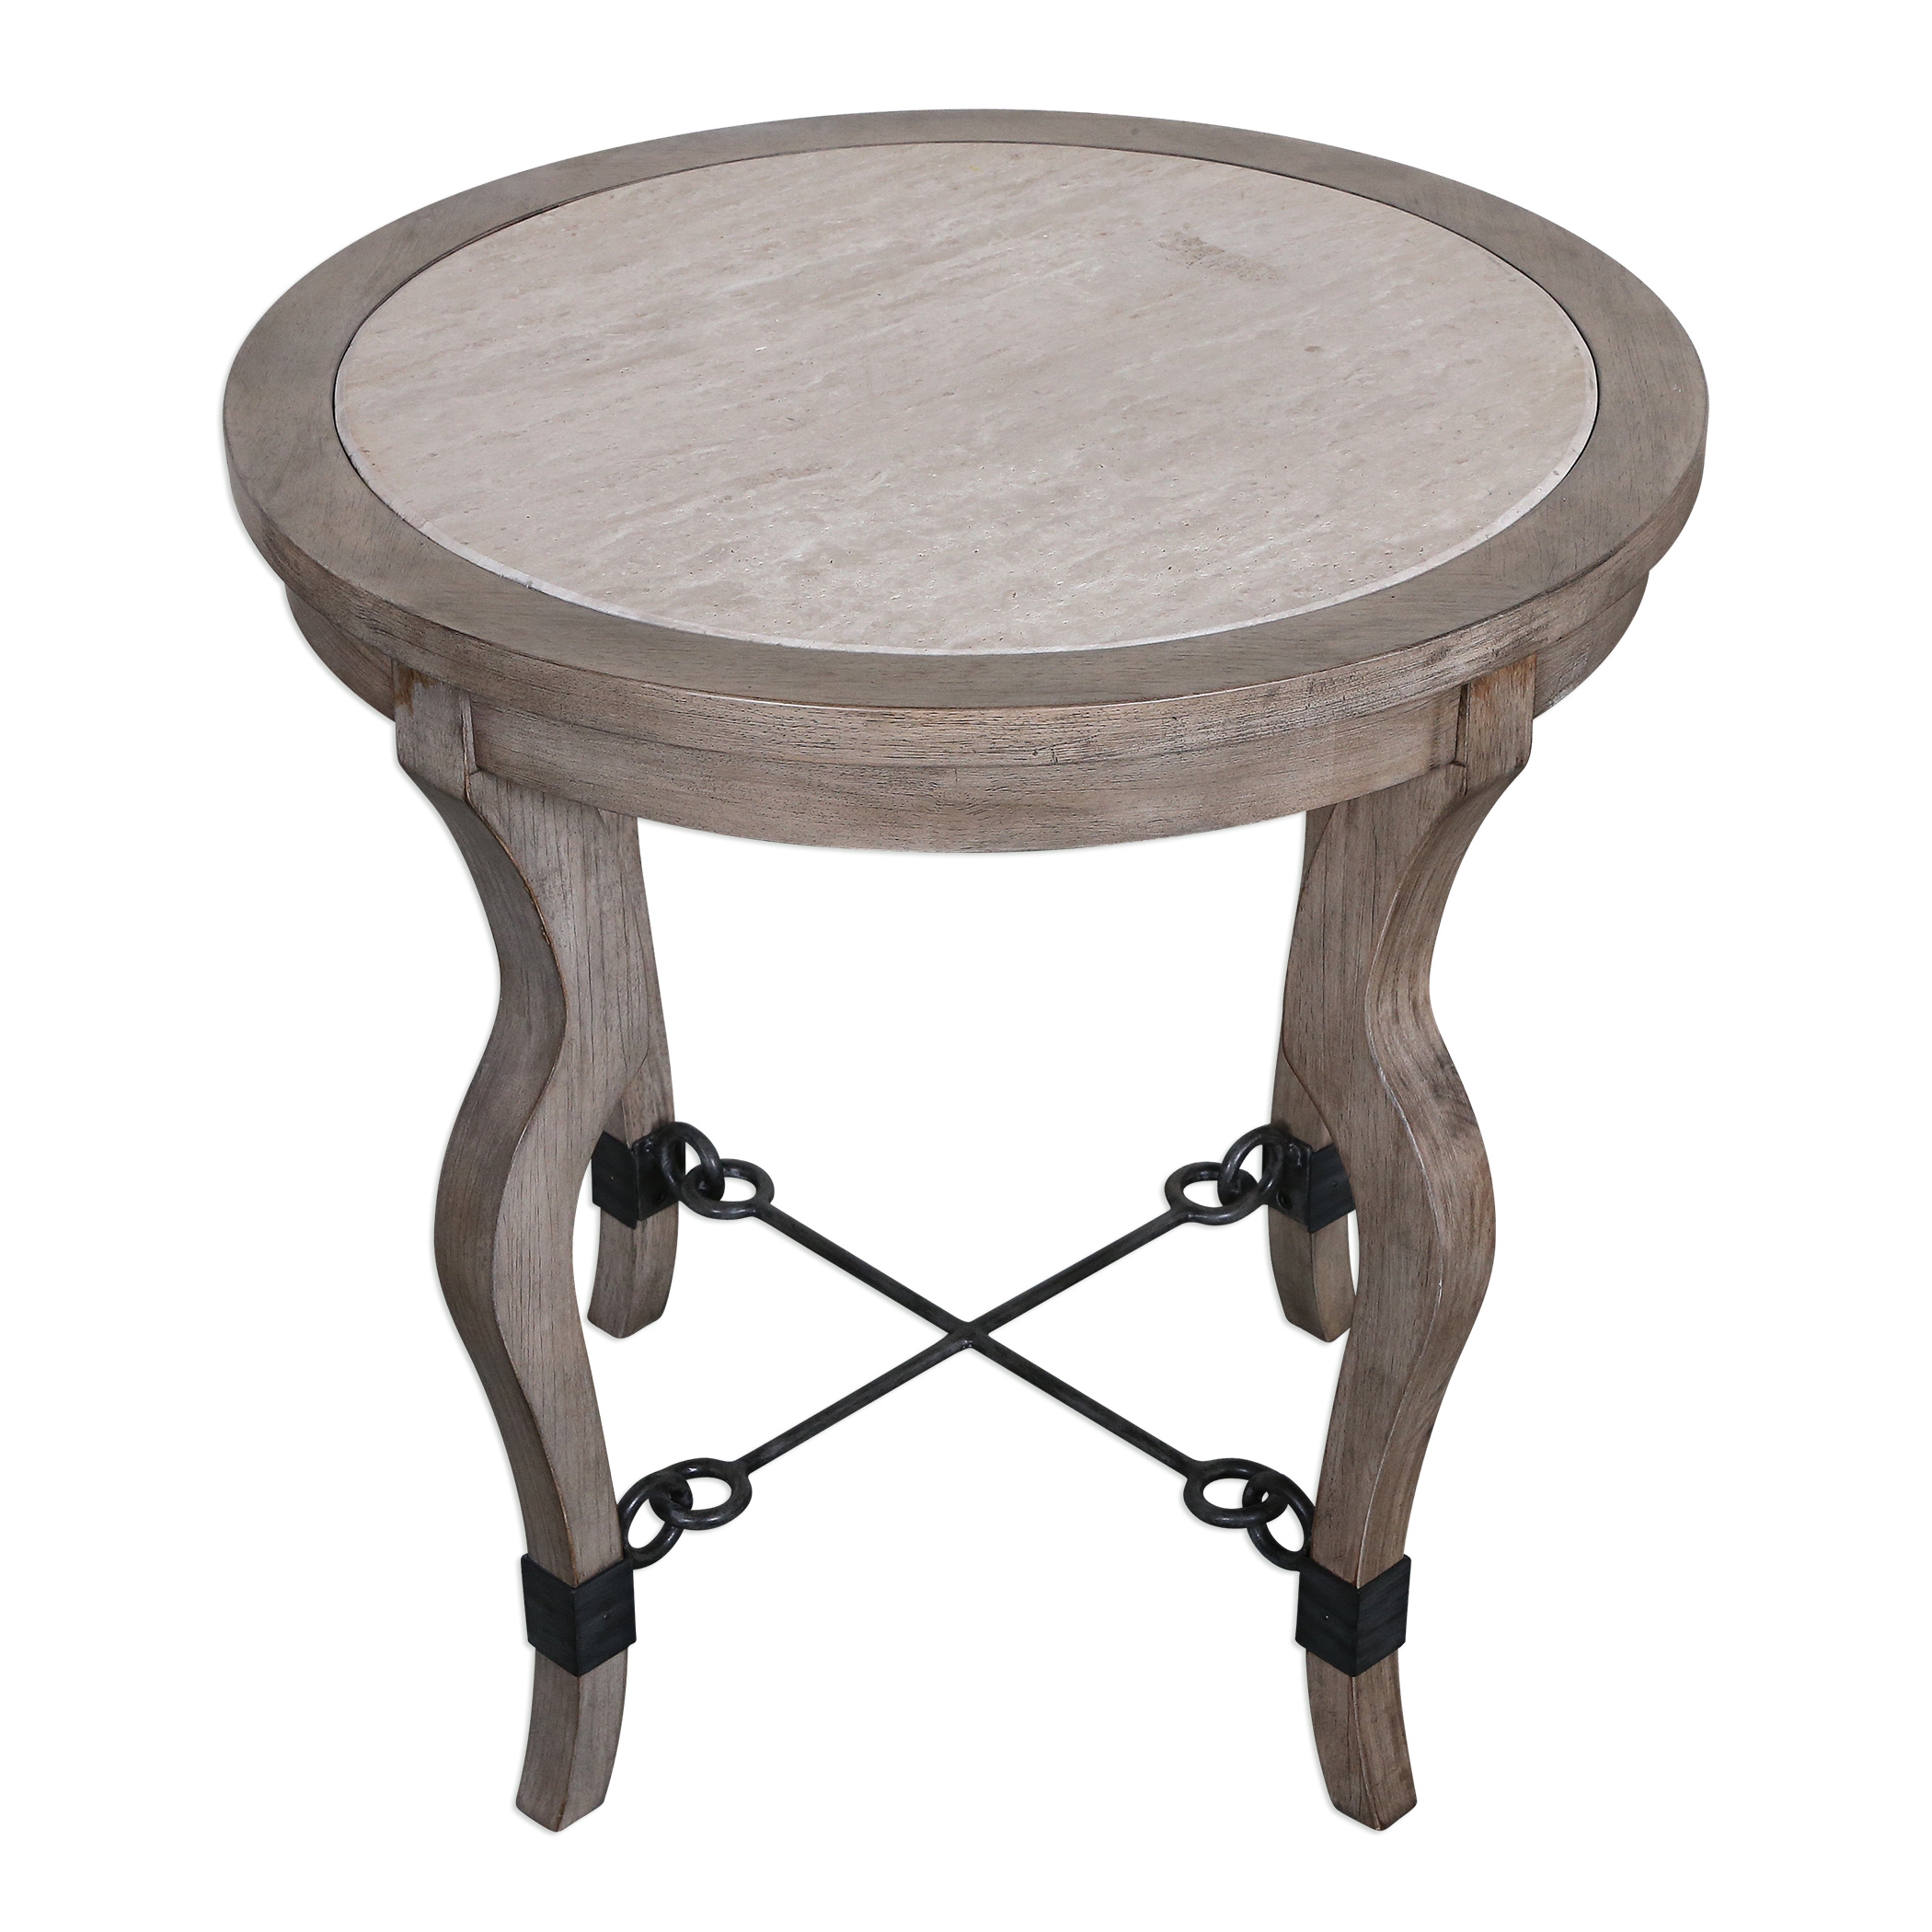 Blanche Travertine Lamp Table - Image 1